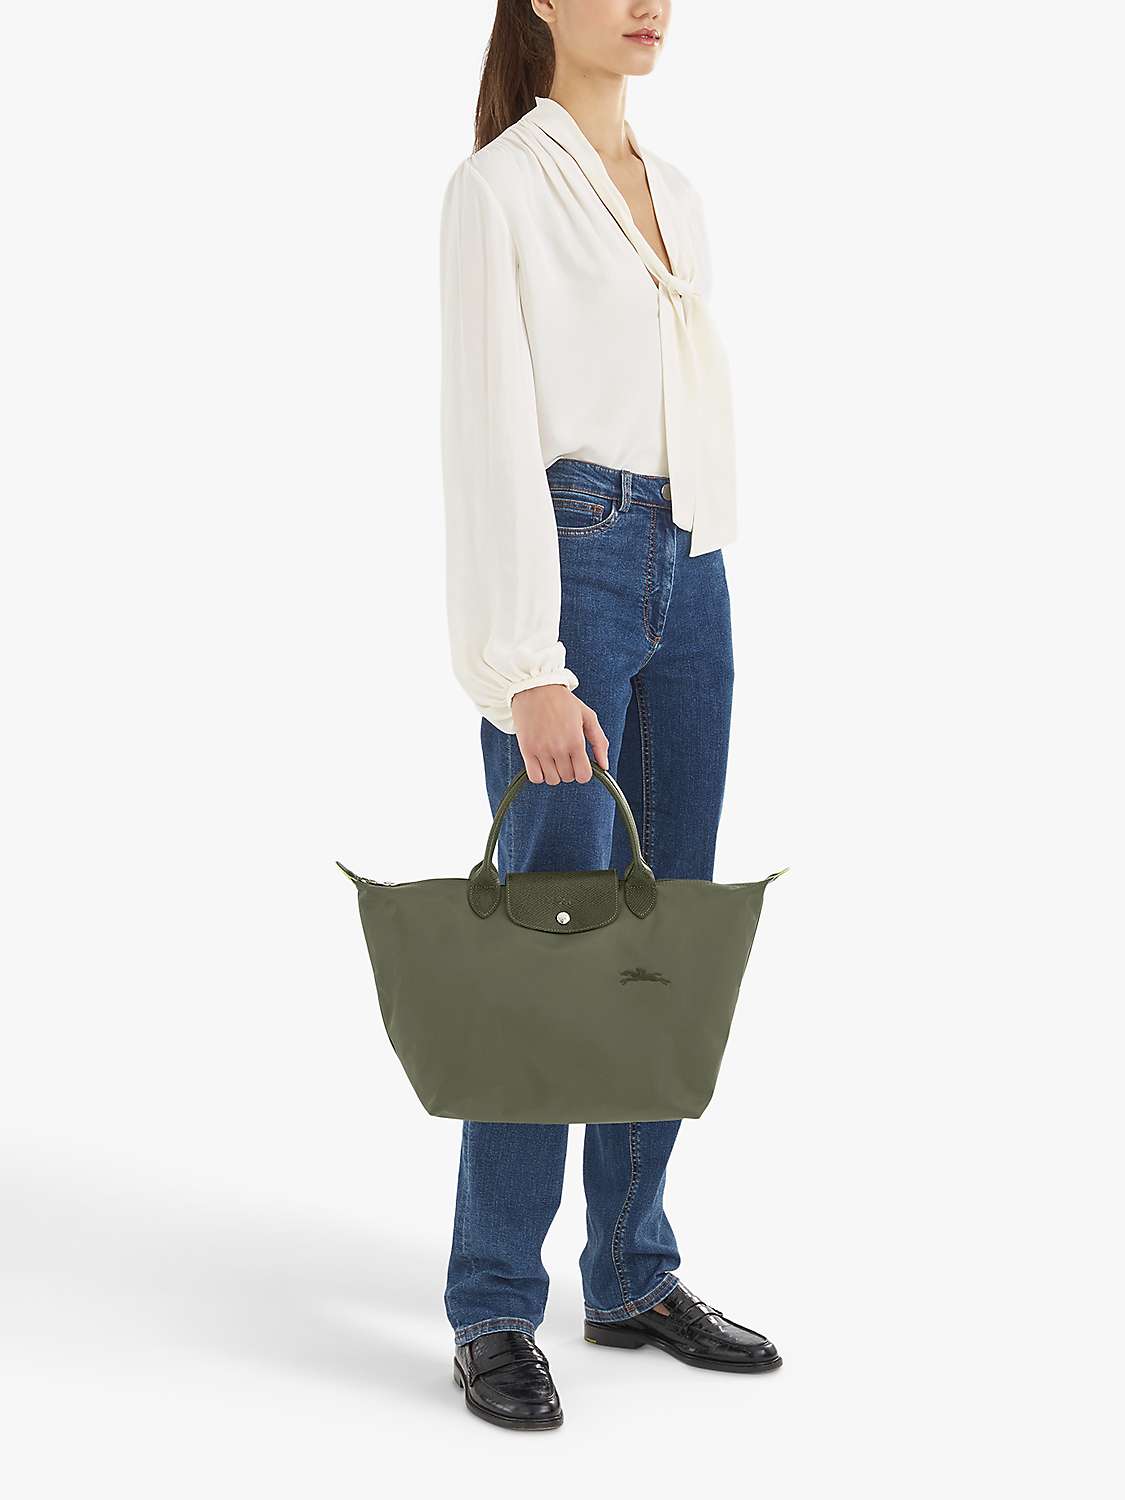 Buy Longchamp Le Pliage Green Recycled Canvas Medium Top Handle Bag Online at johnlewis.com